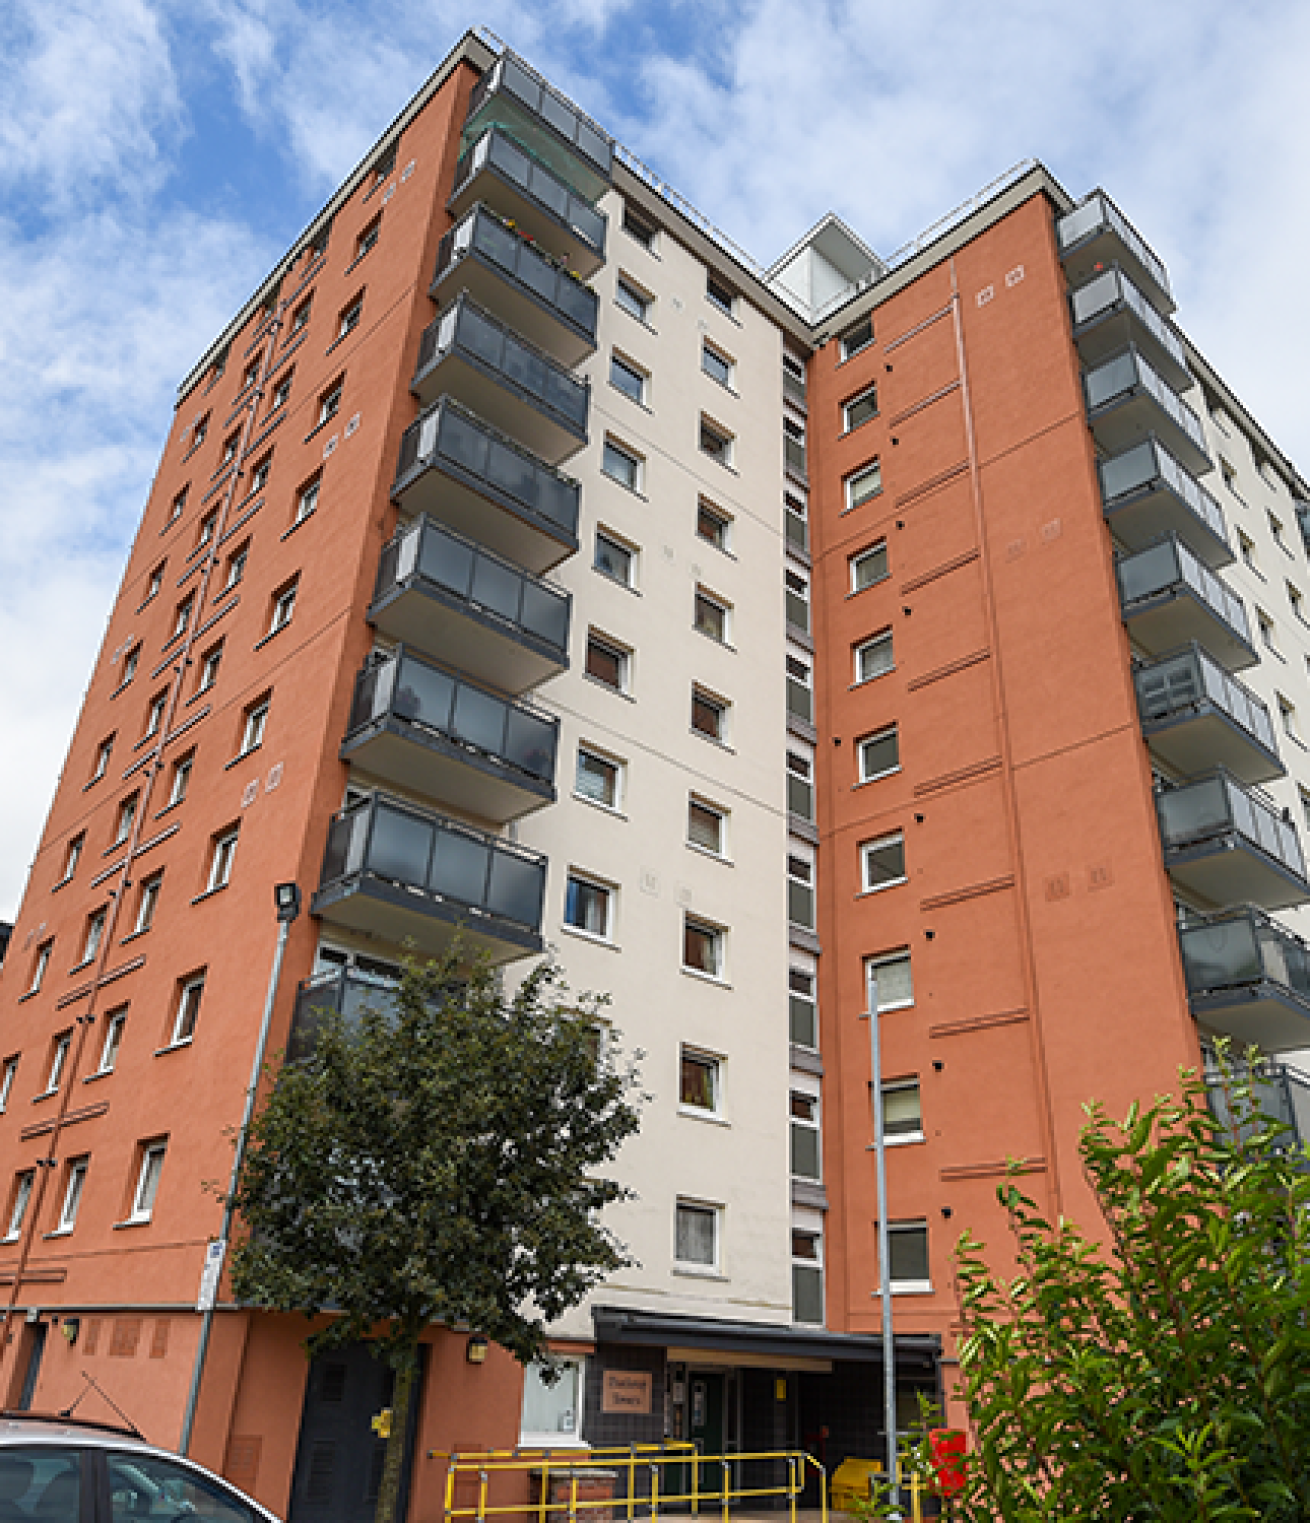 Exterior of the high rise accommodation at Thackeray Towers